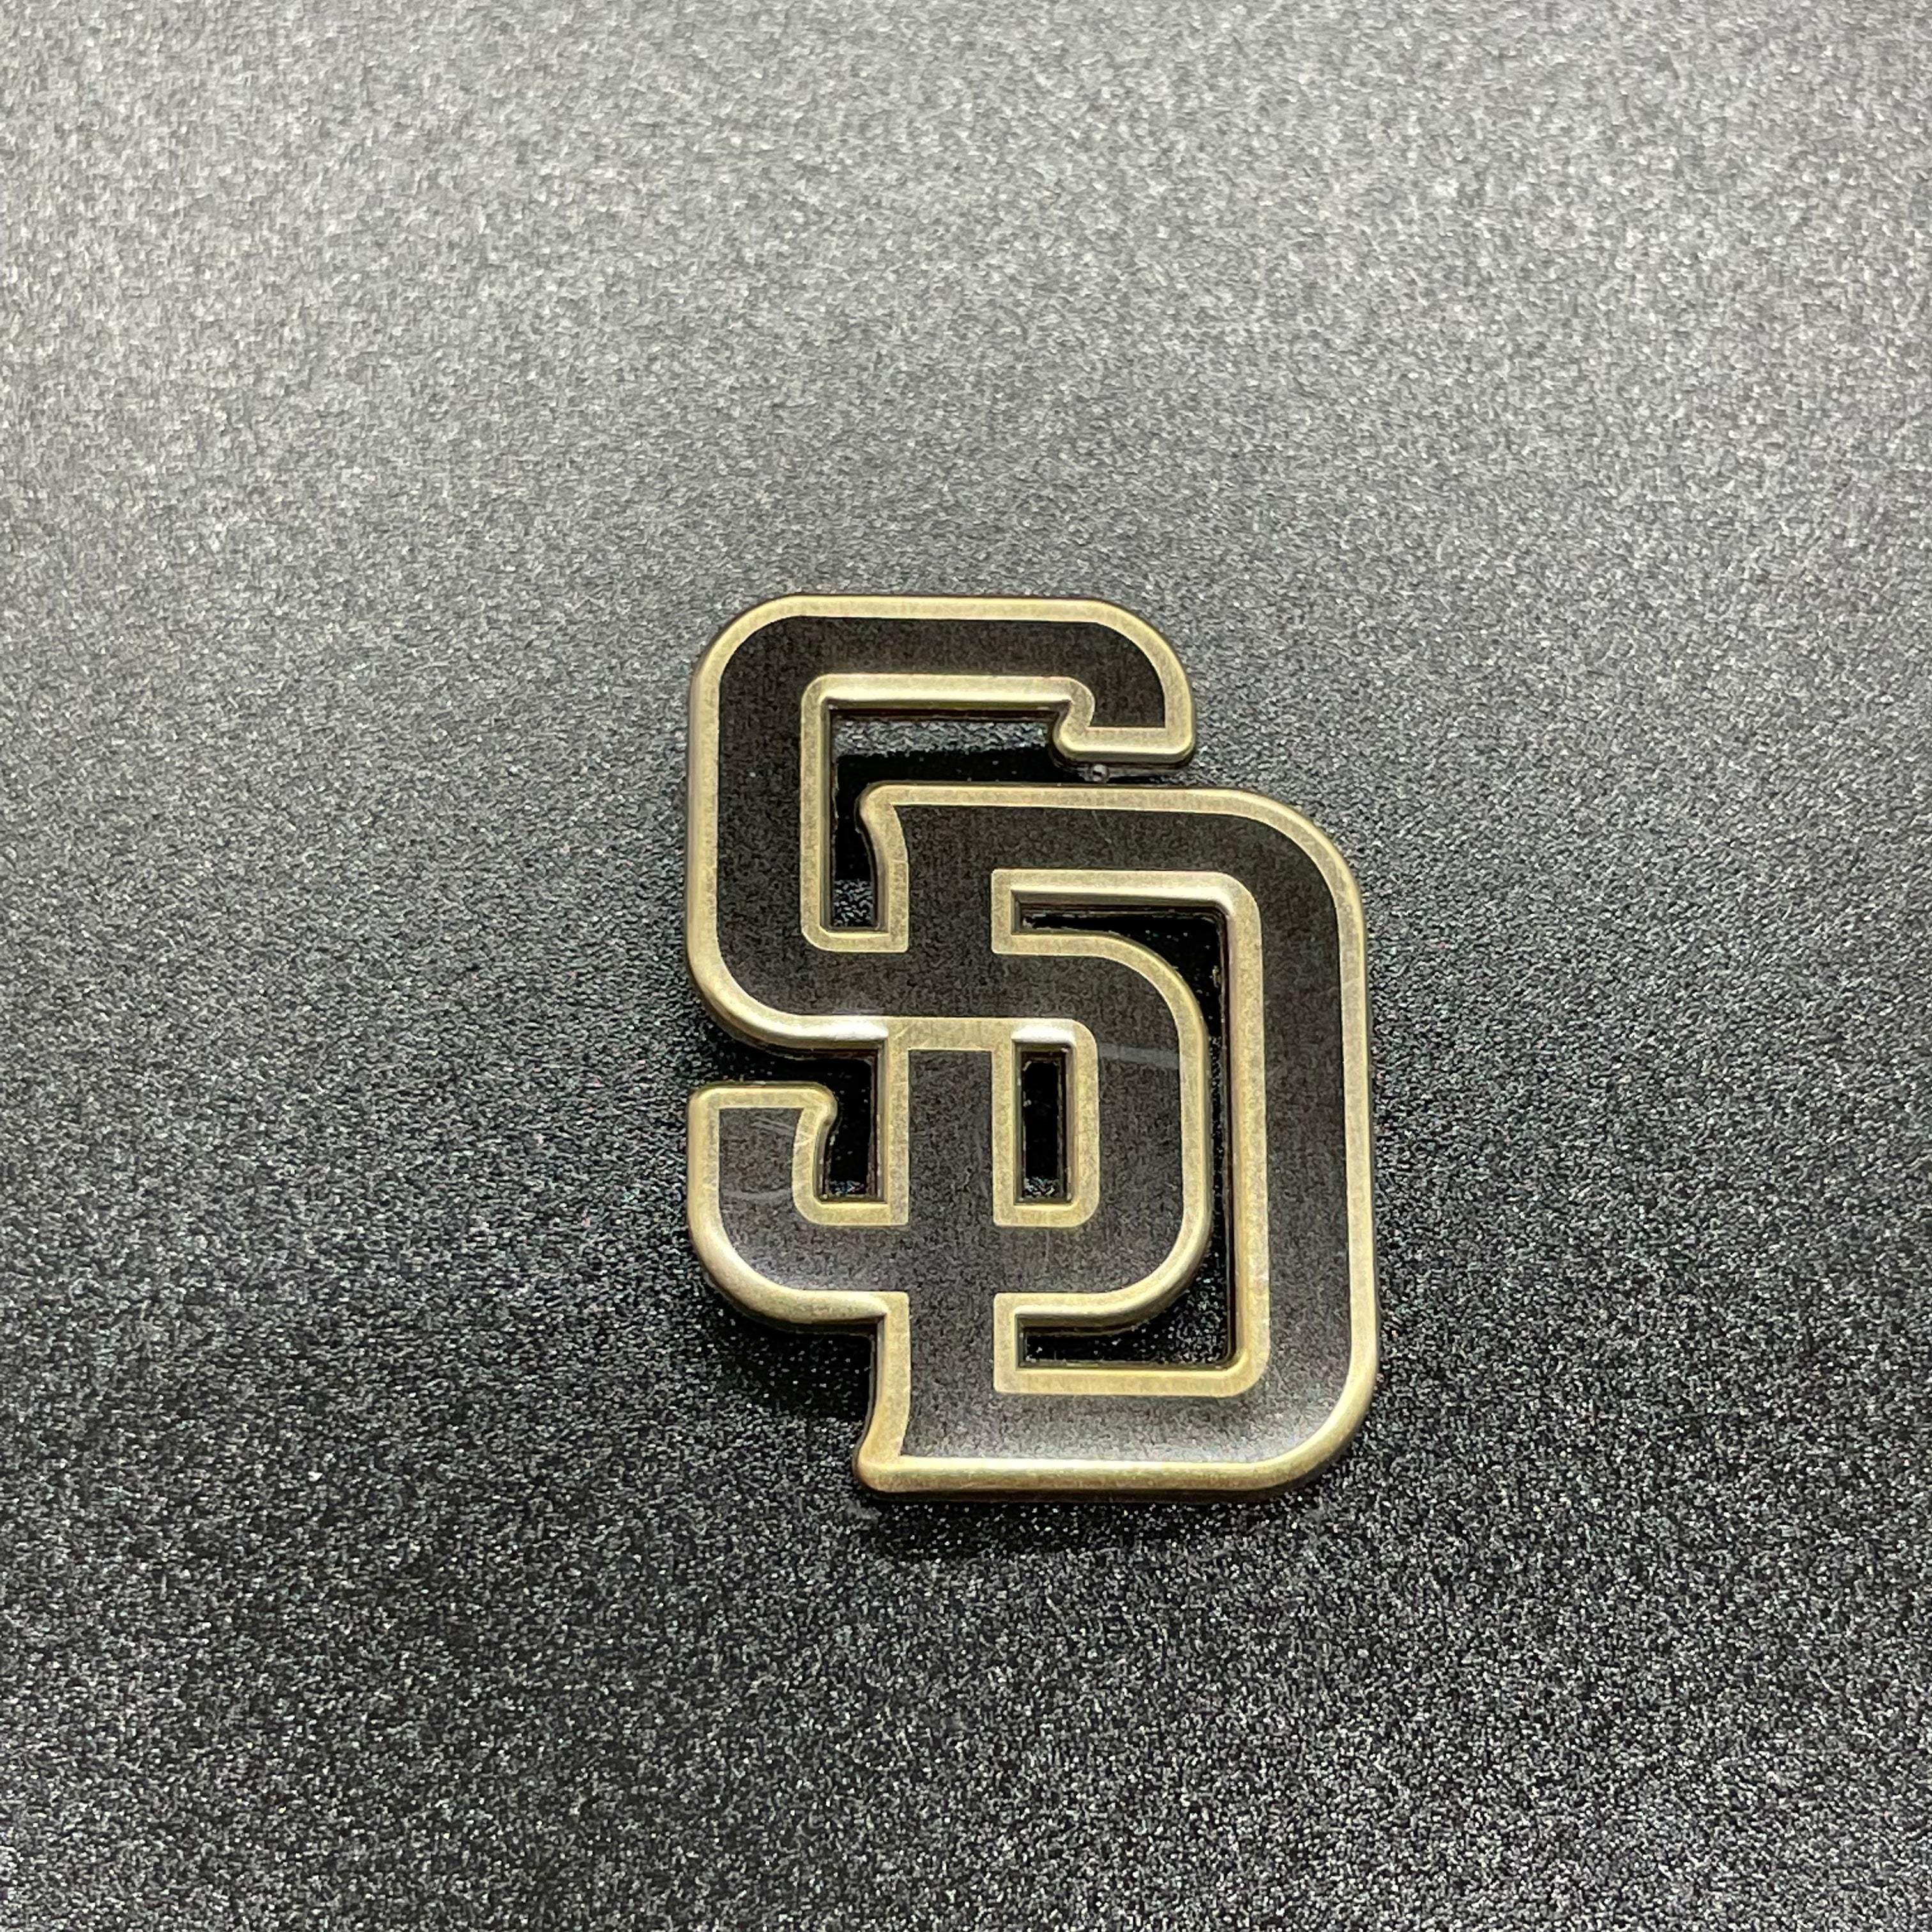 San Diego Padres Mascot MLB Collector Enamel Pin Jewelry Card